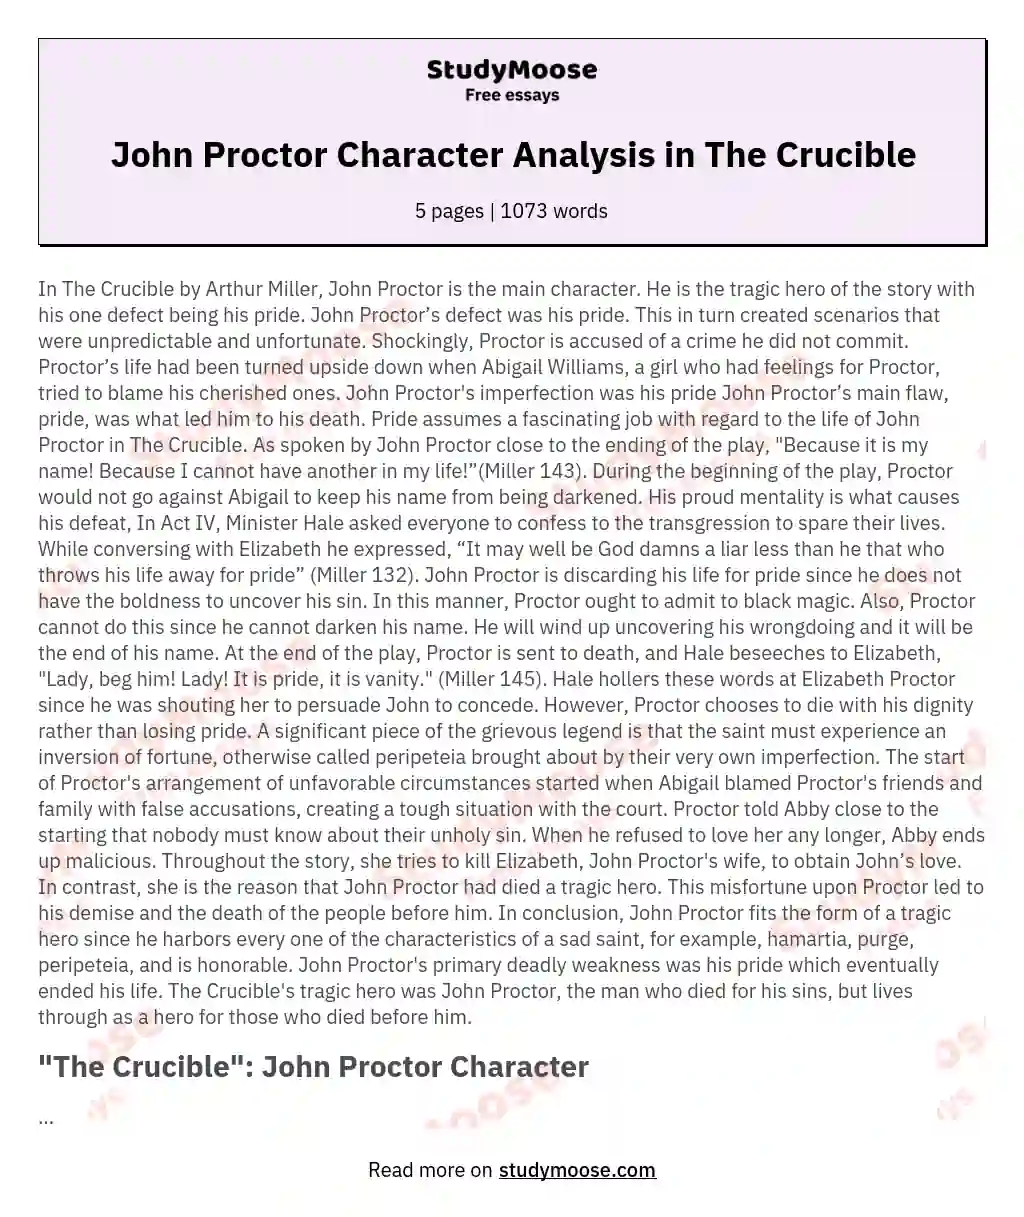 John Proctor Character Analysis in The Crucible